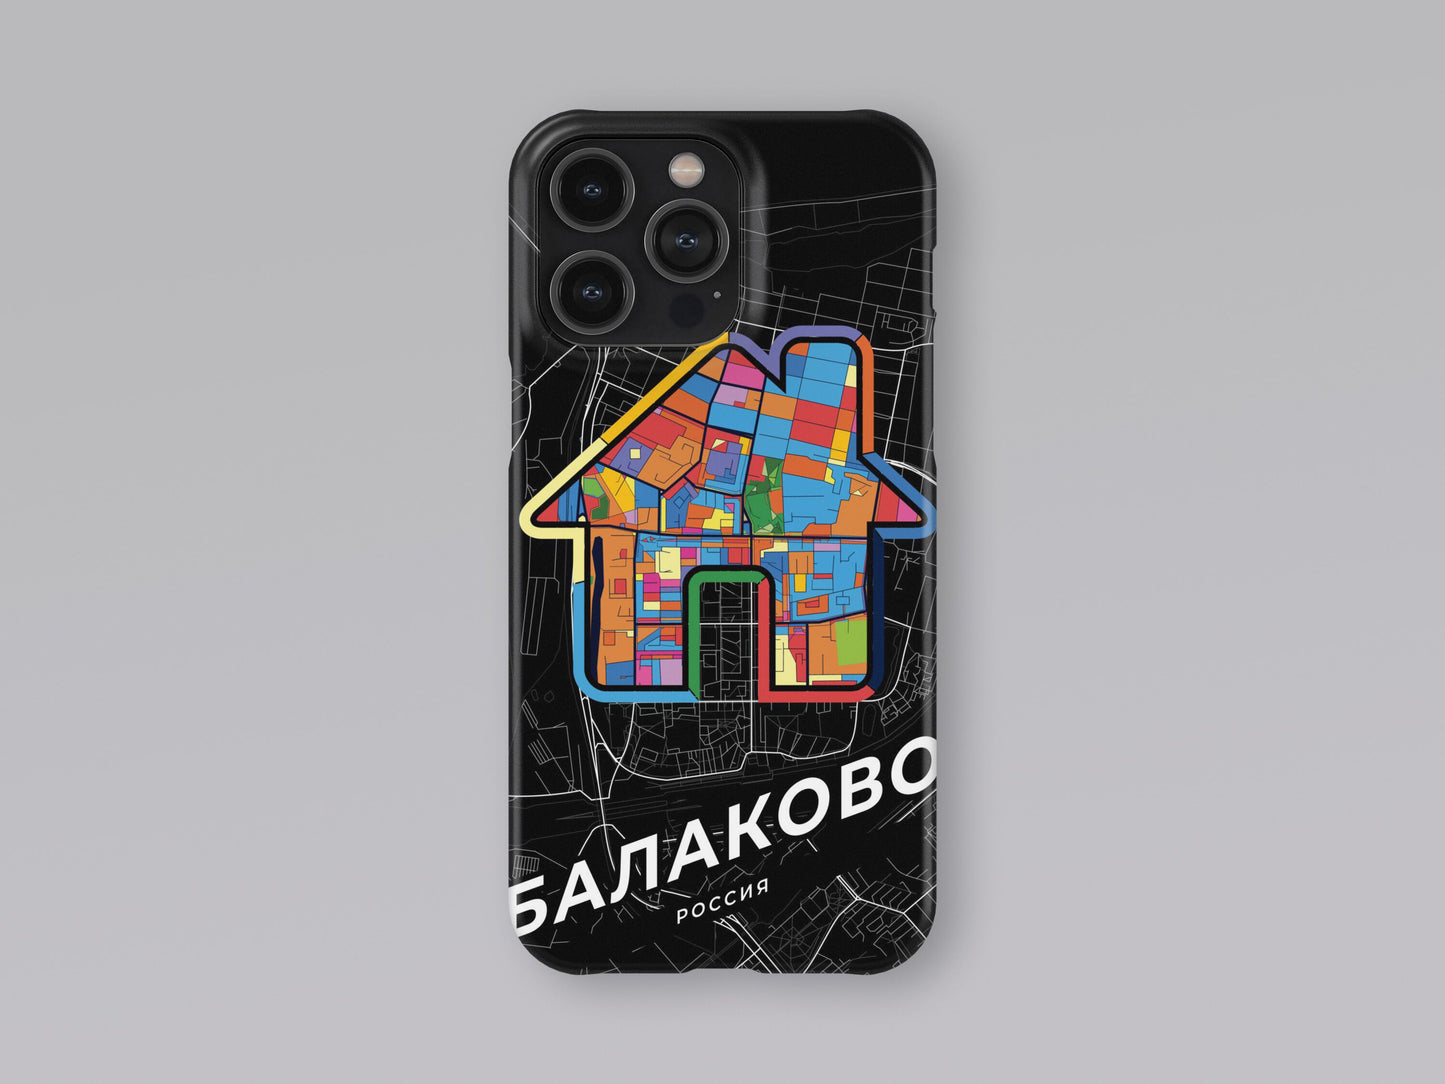 Balakovo Russia slim phone case with colorful icon. Birthday, wedding or housewarming gift. Couple match cases. 3